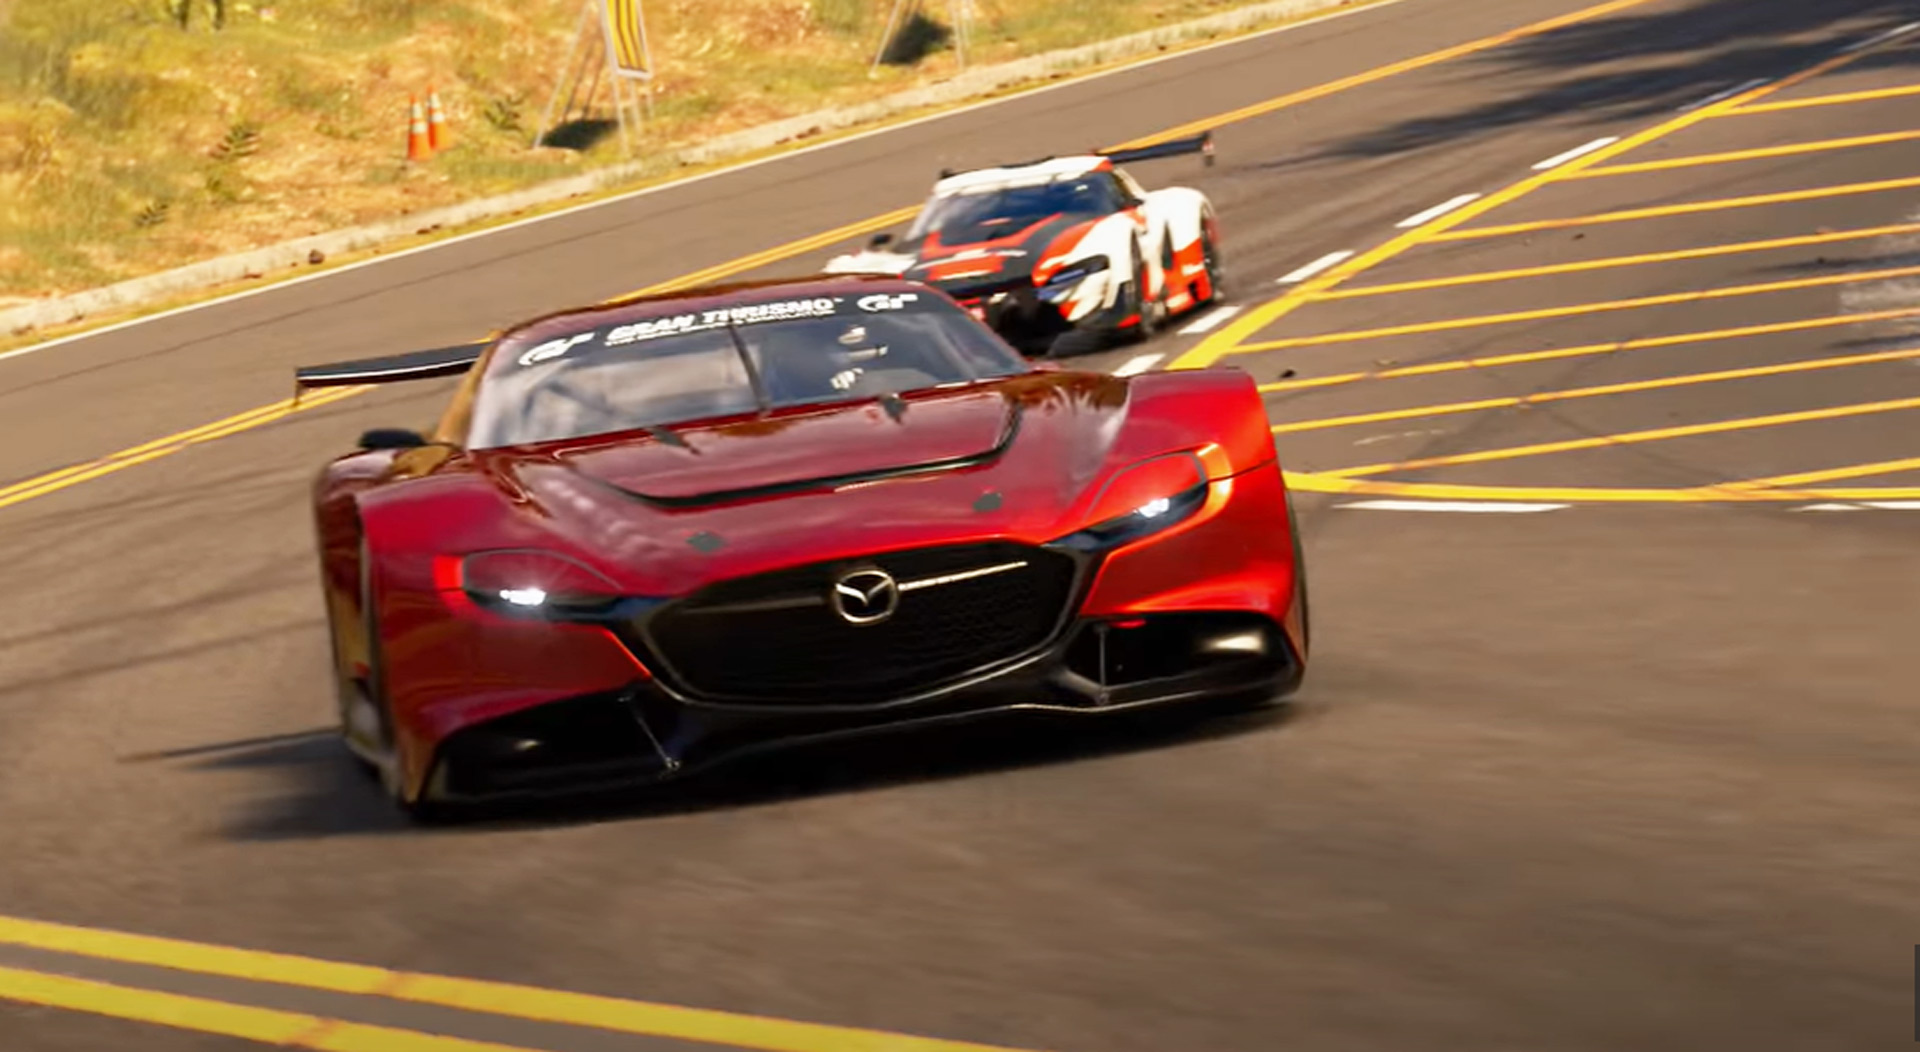 PS5 title Gran Turismo 7 will be a must-buy see PlayStation 5's capabilities T3